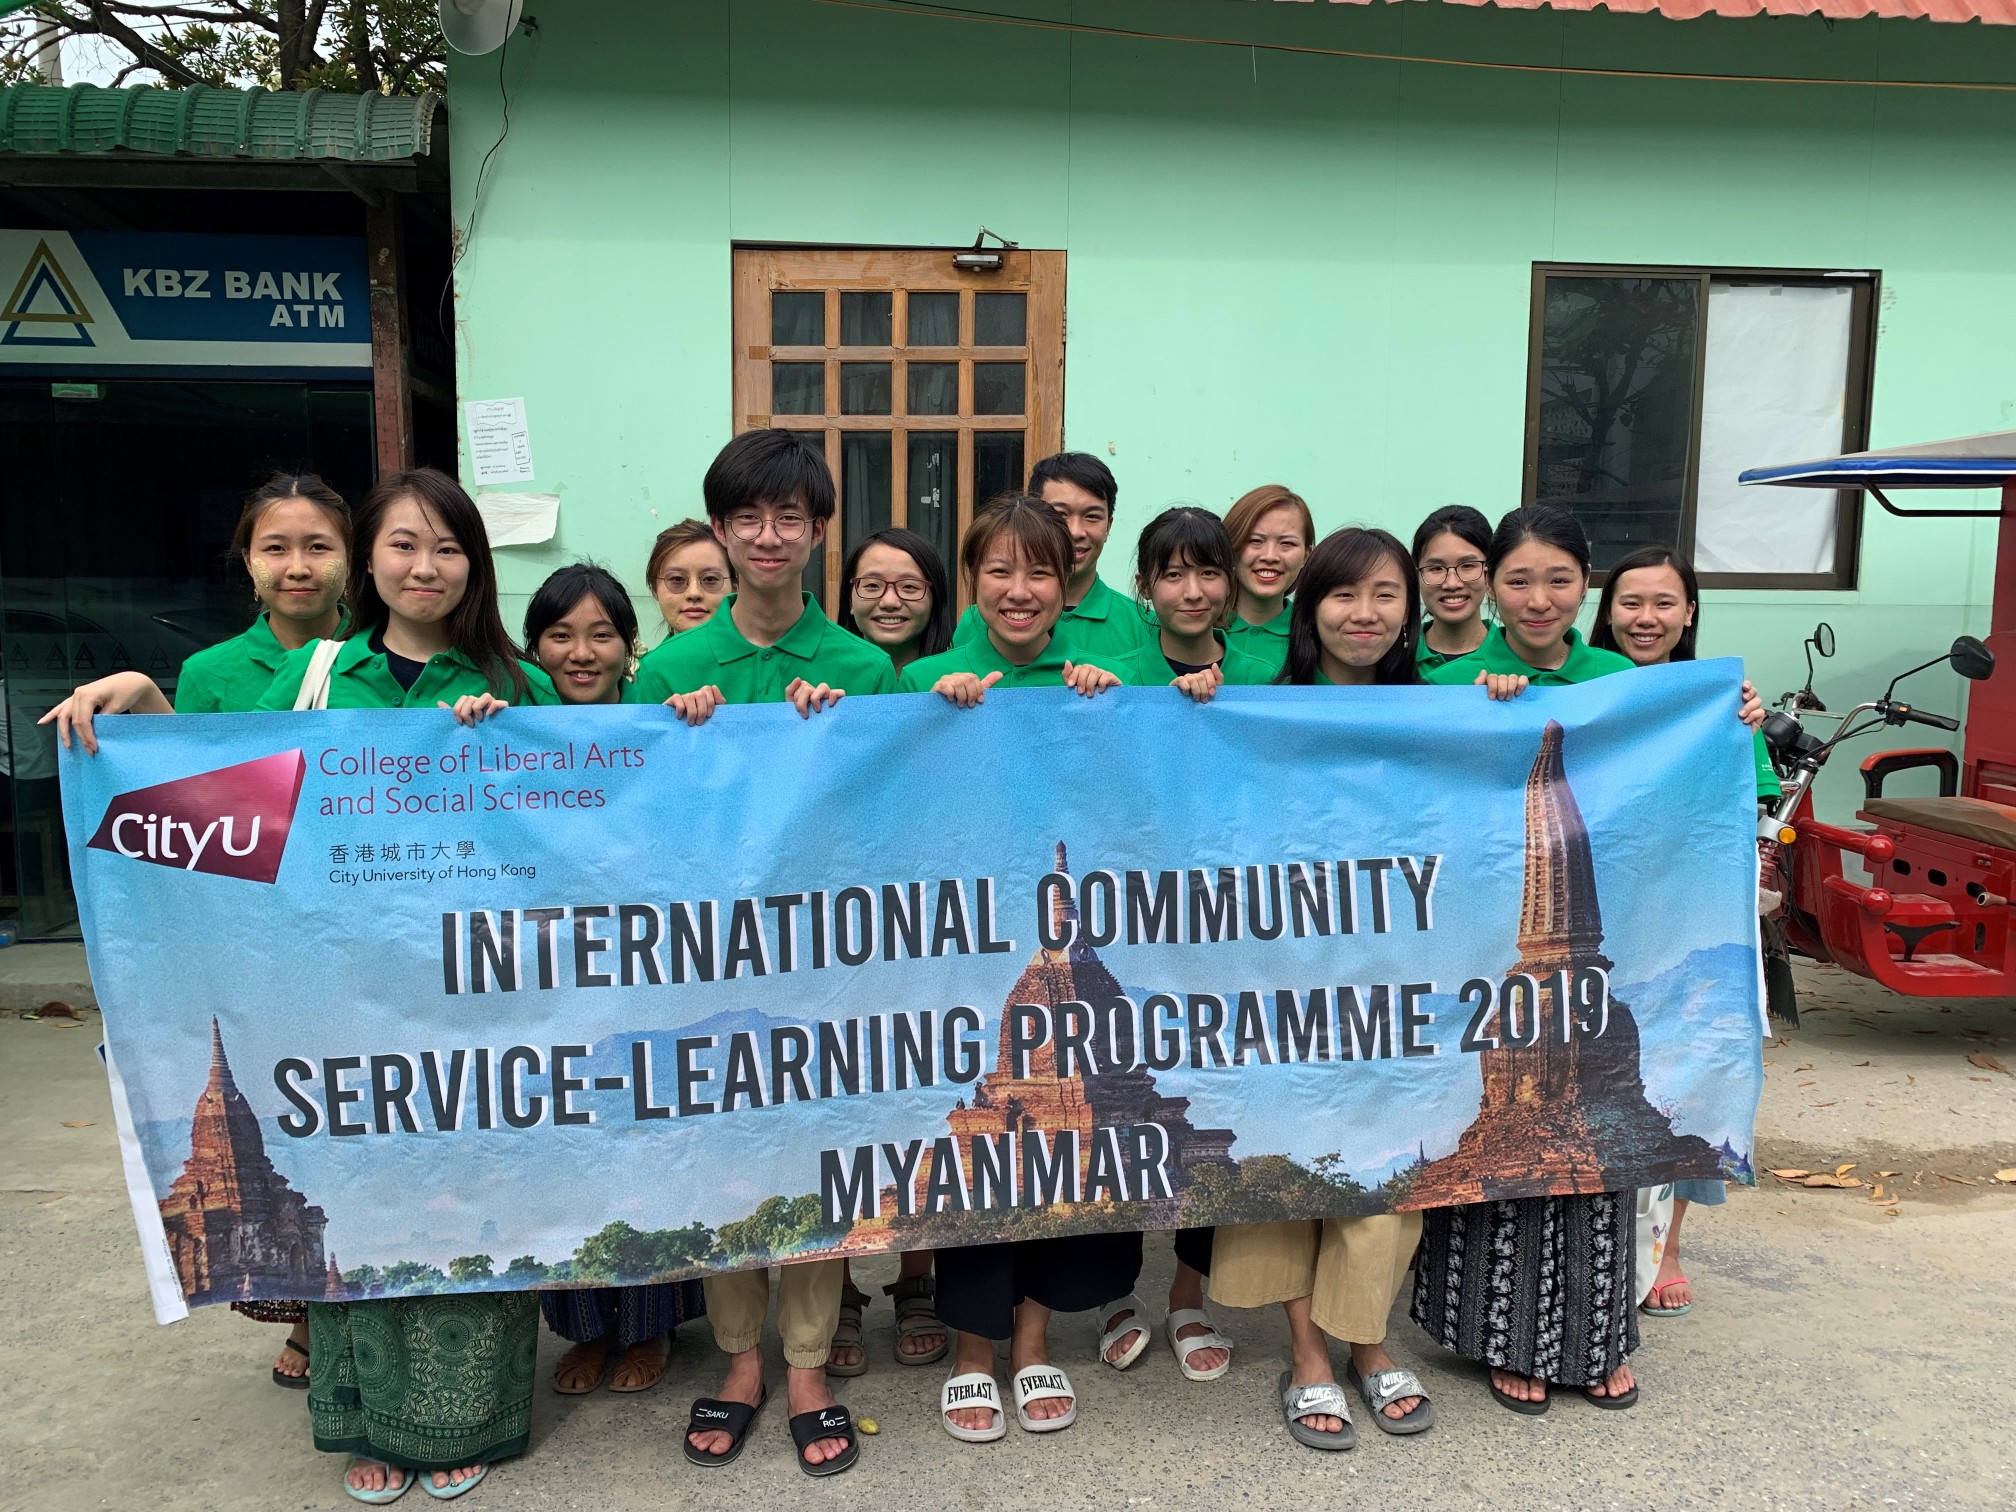 Students Bring Home New Discoveries and Treasured Experiences from Service Learning Internship in Myanmar